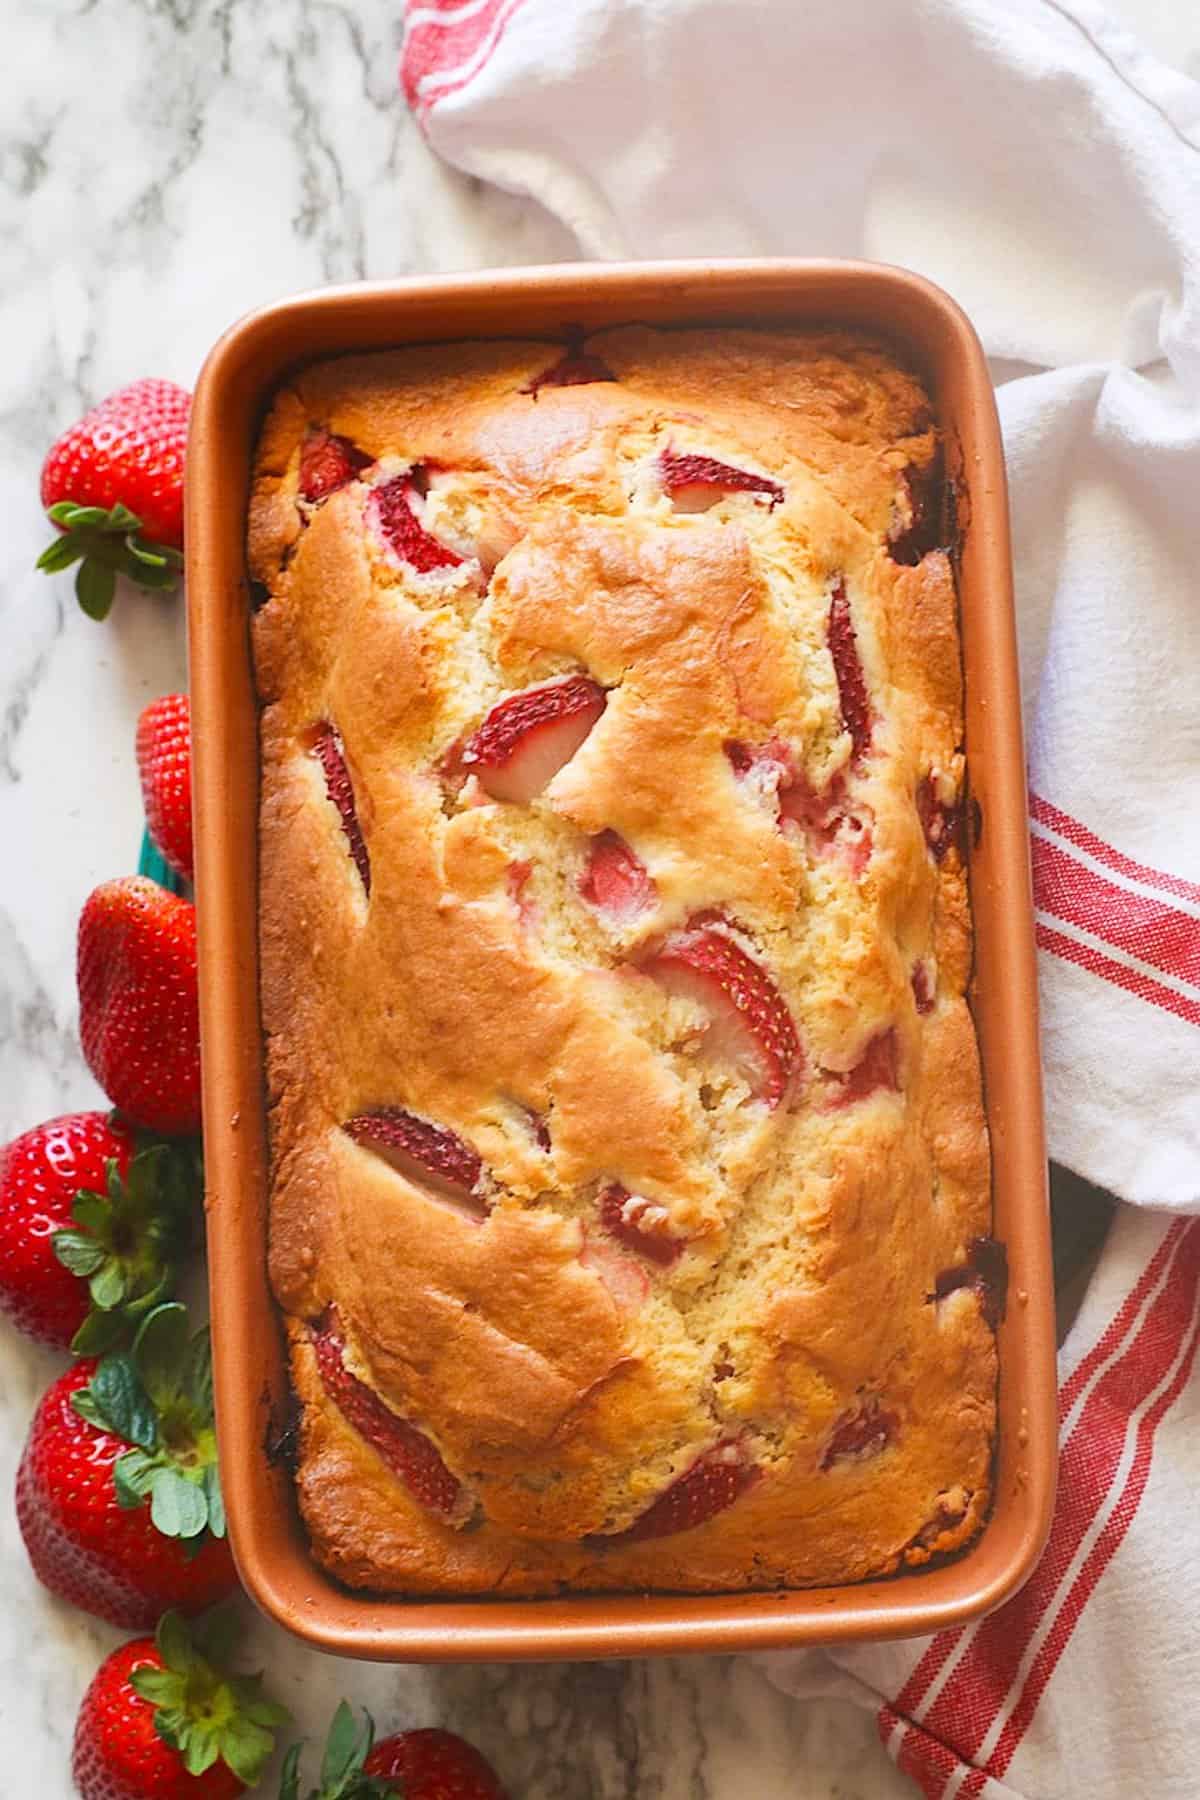 Decadent strawberry bread fresh from the oven waiting to cool and enjoy